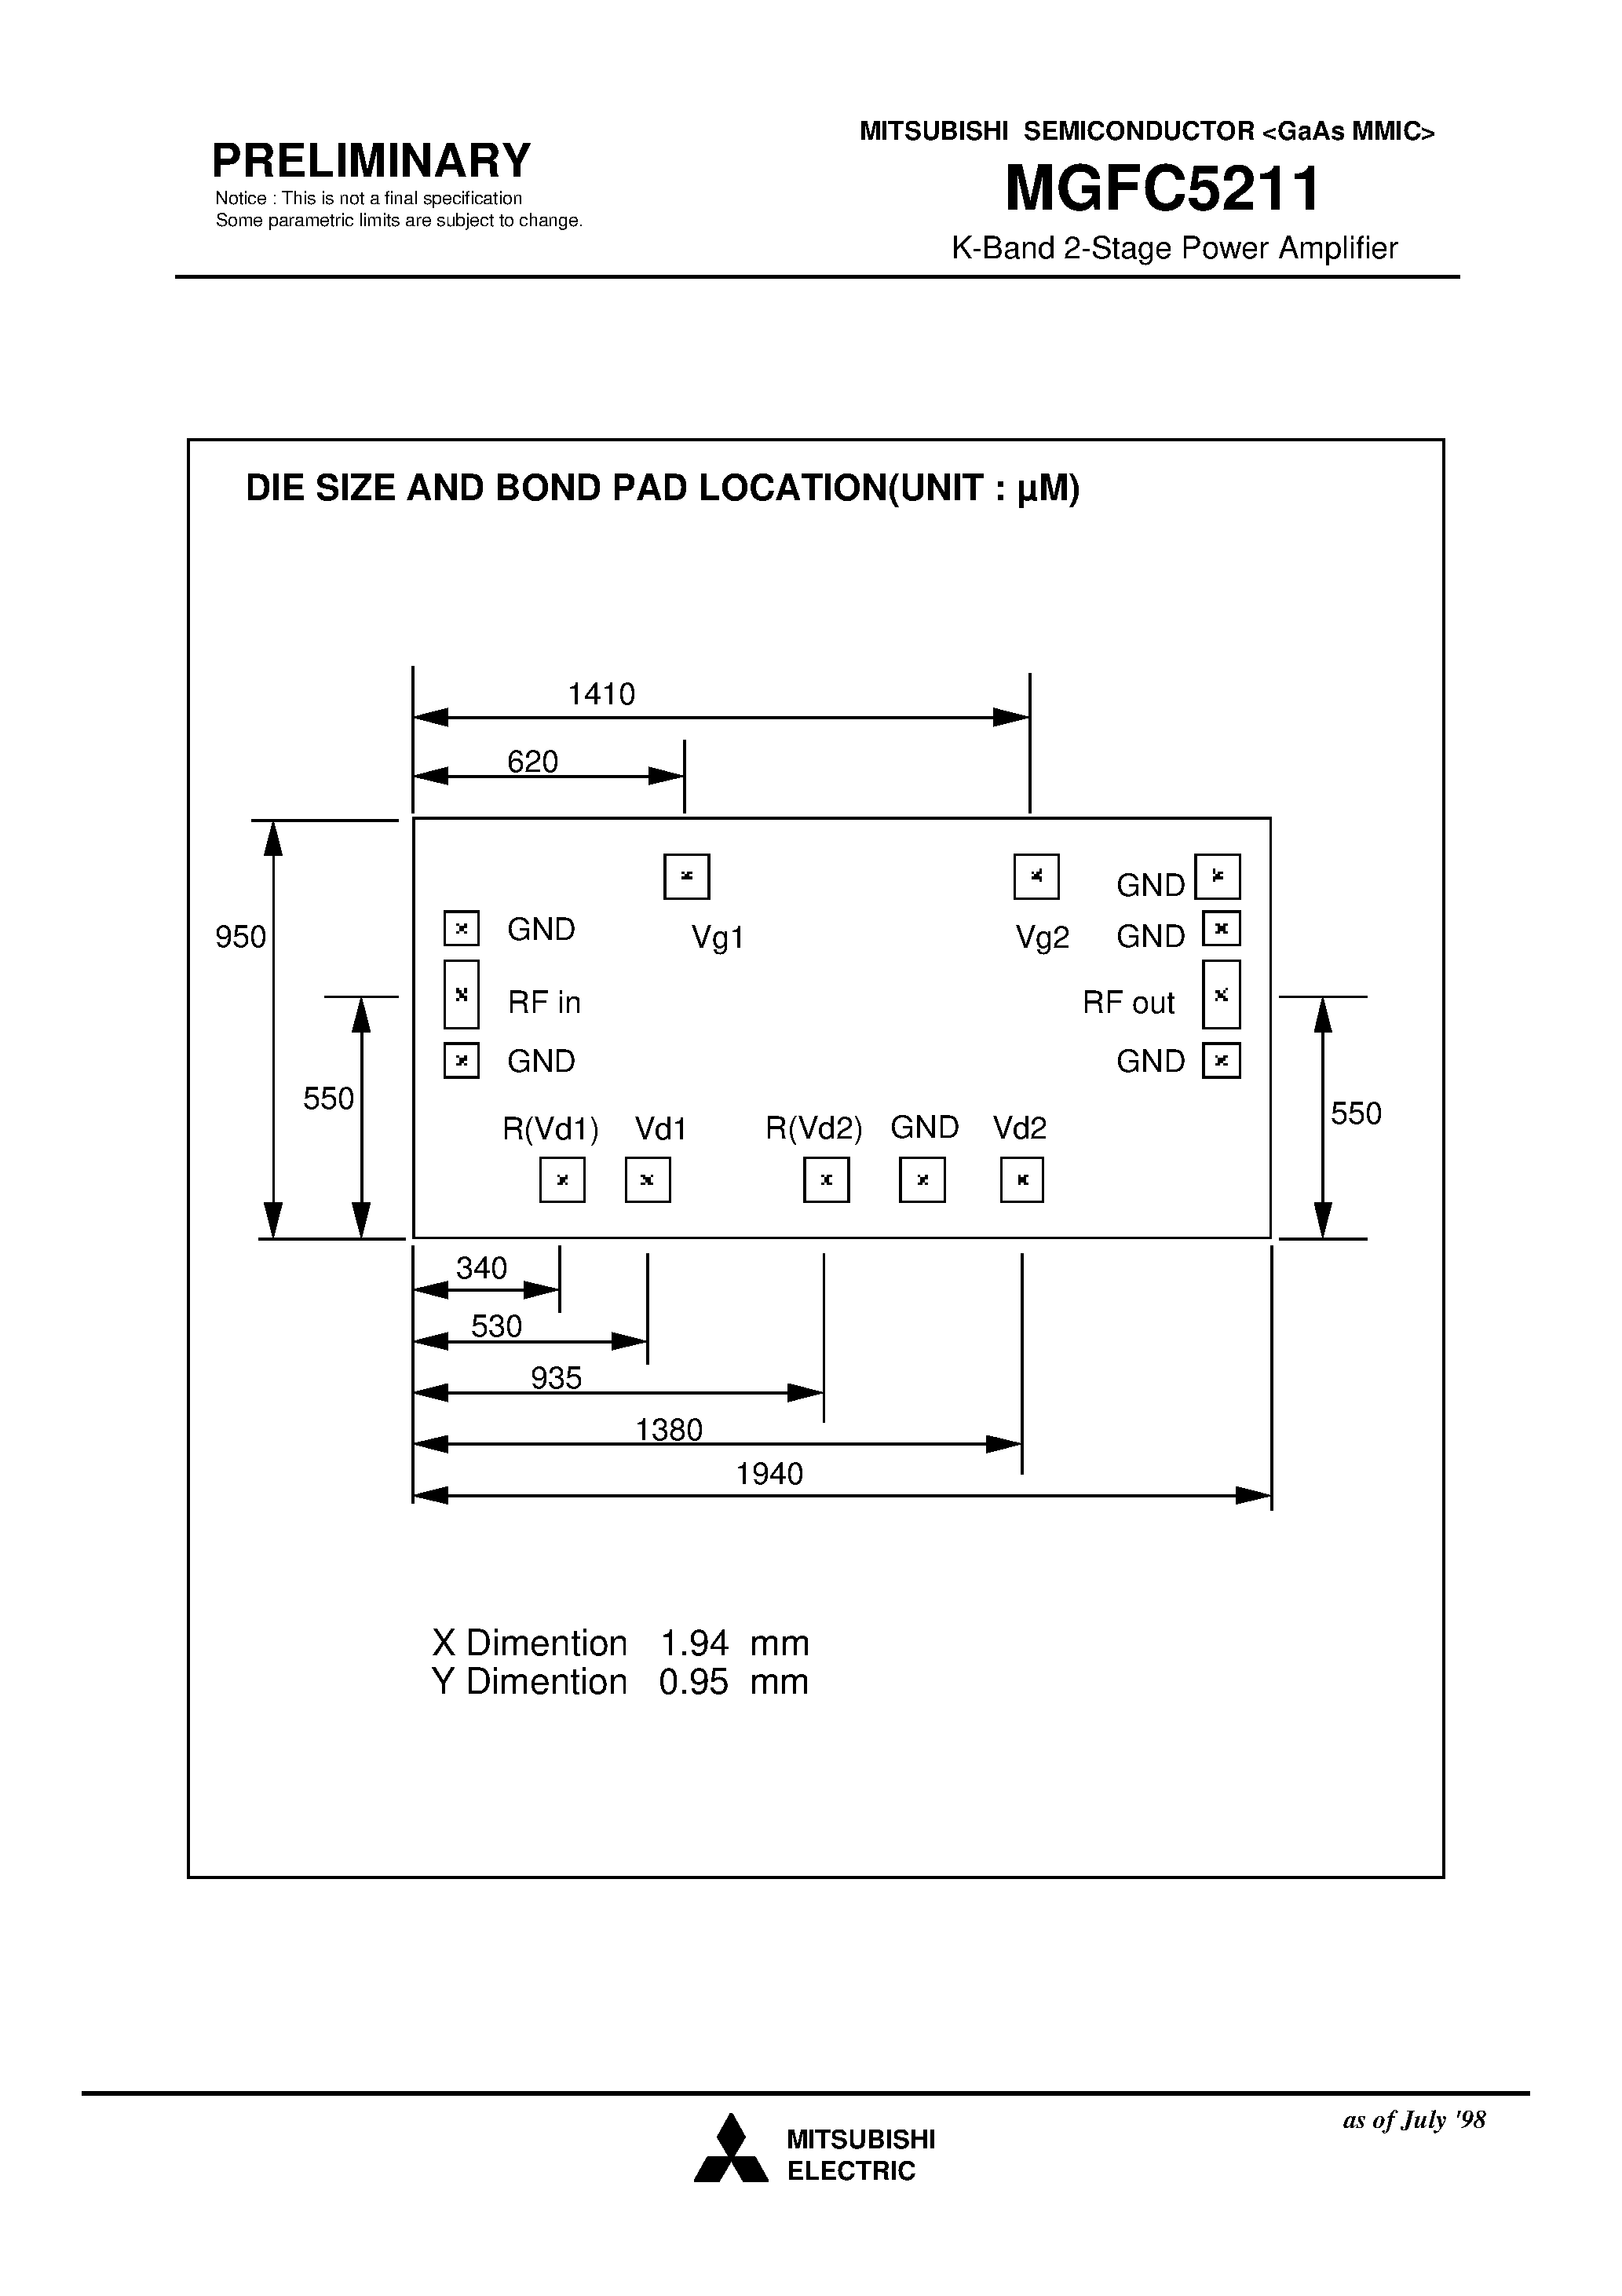 Datasheet MGFC5211 - K-Band 2-Stage Power Amplifier page 2